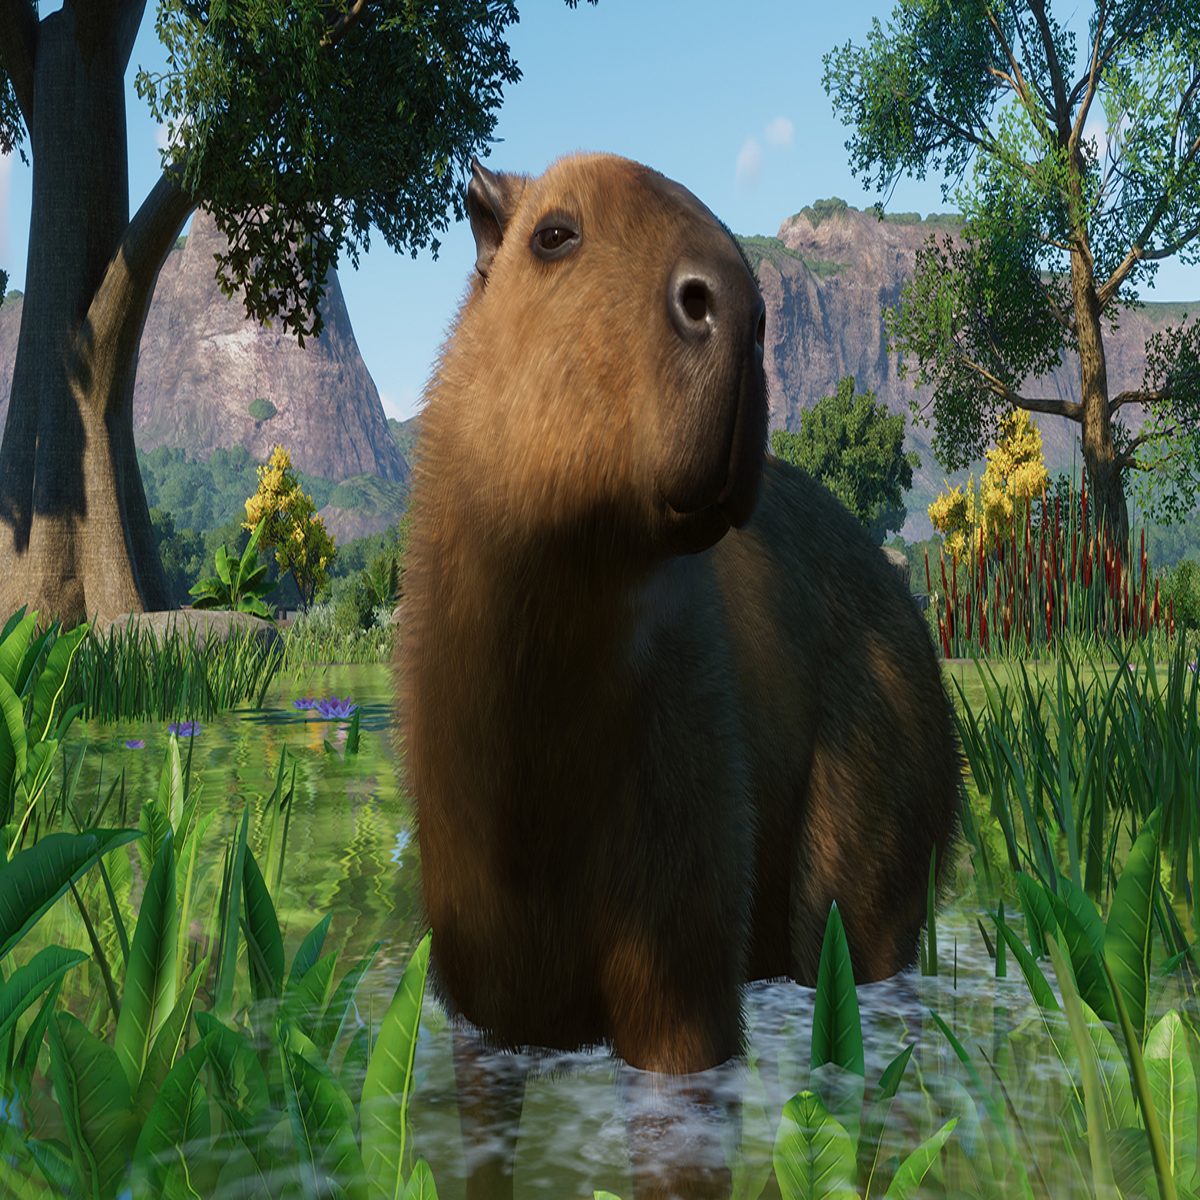 Planet Zoo: Tropical Pack and New Content Update Details